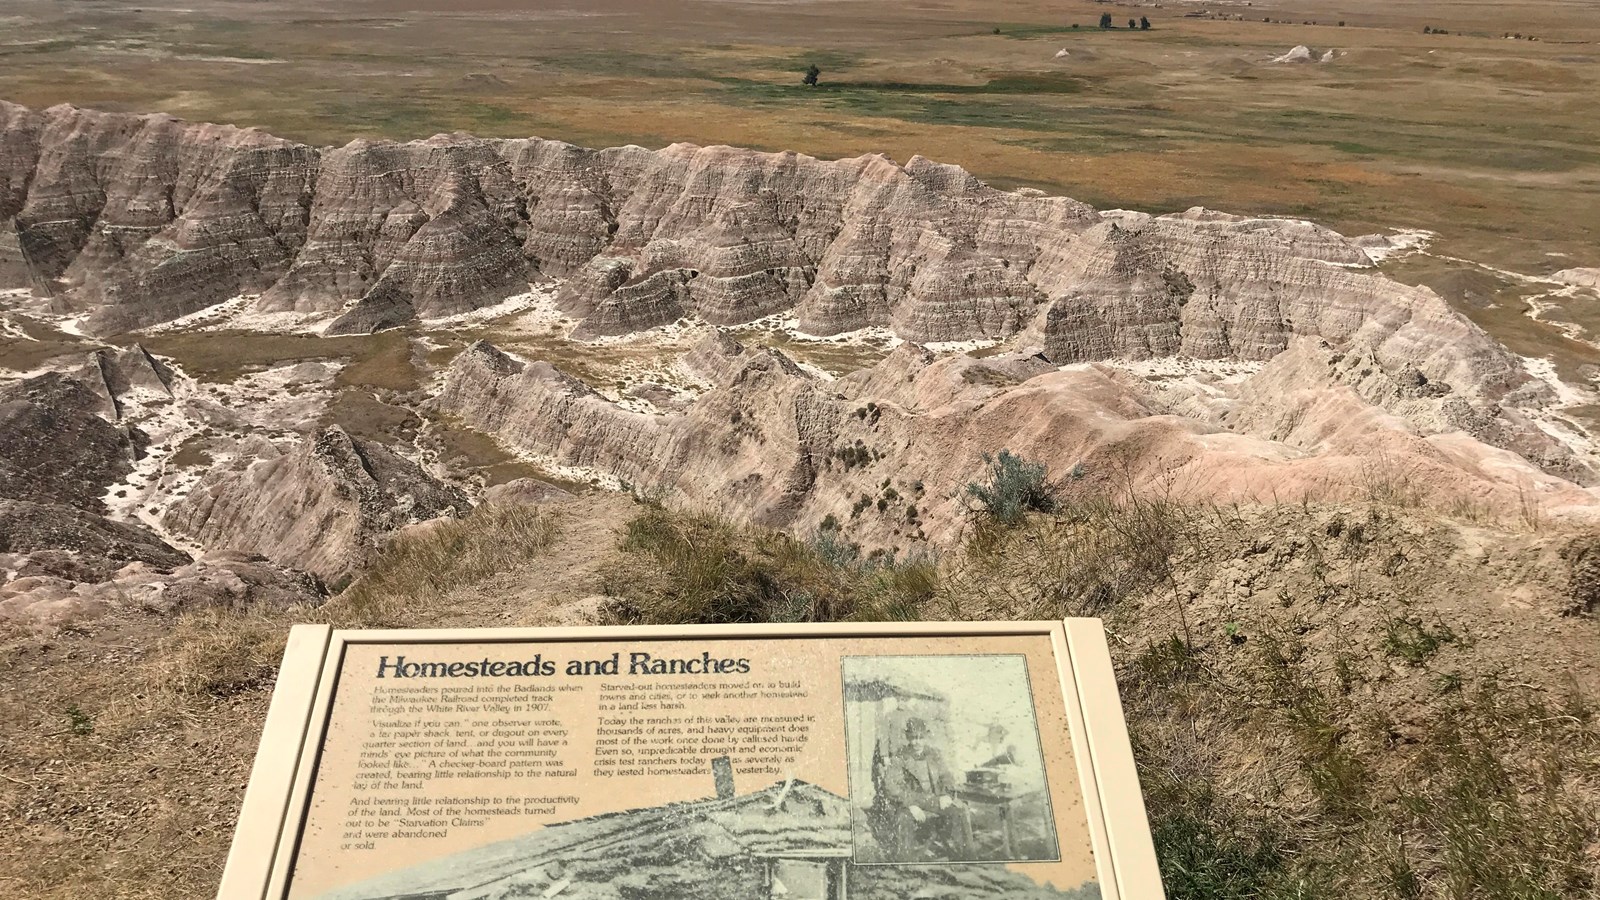 A wayside exhibit discussing homesteading lies in front of a view of badlands canyons and prairie.